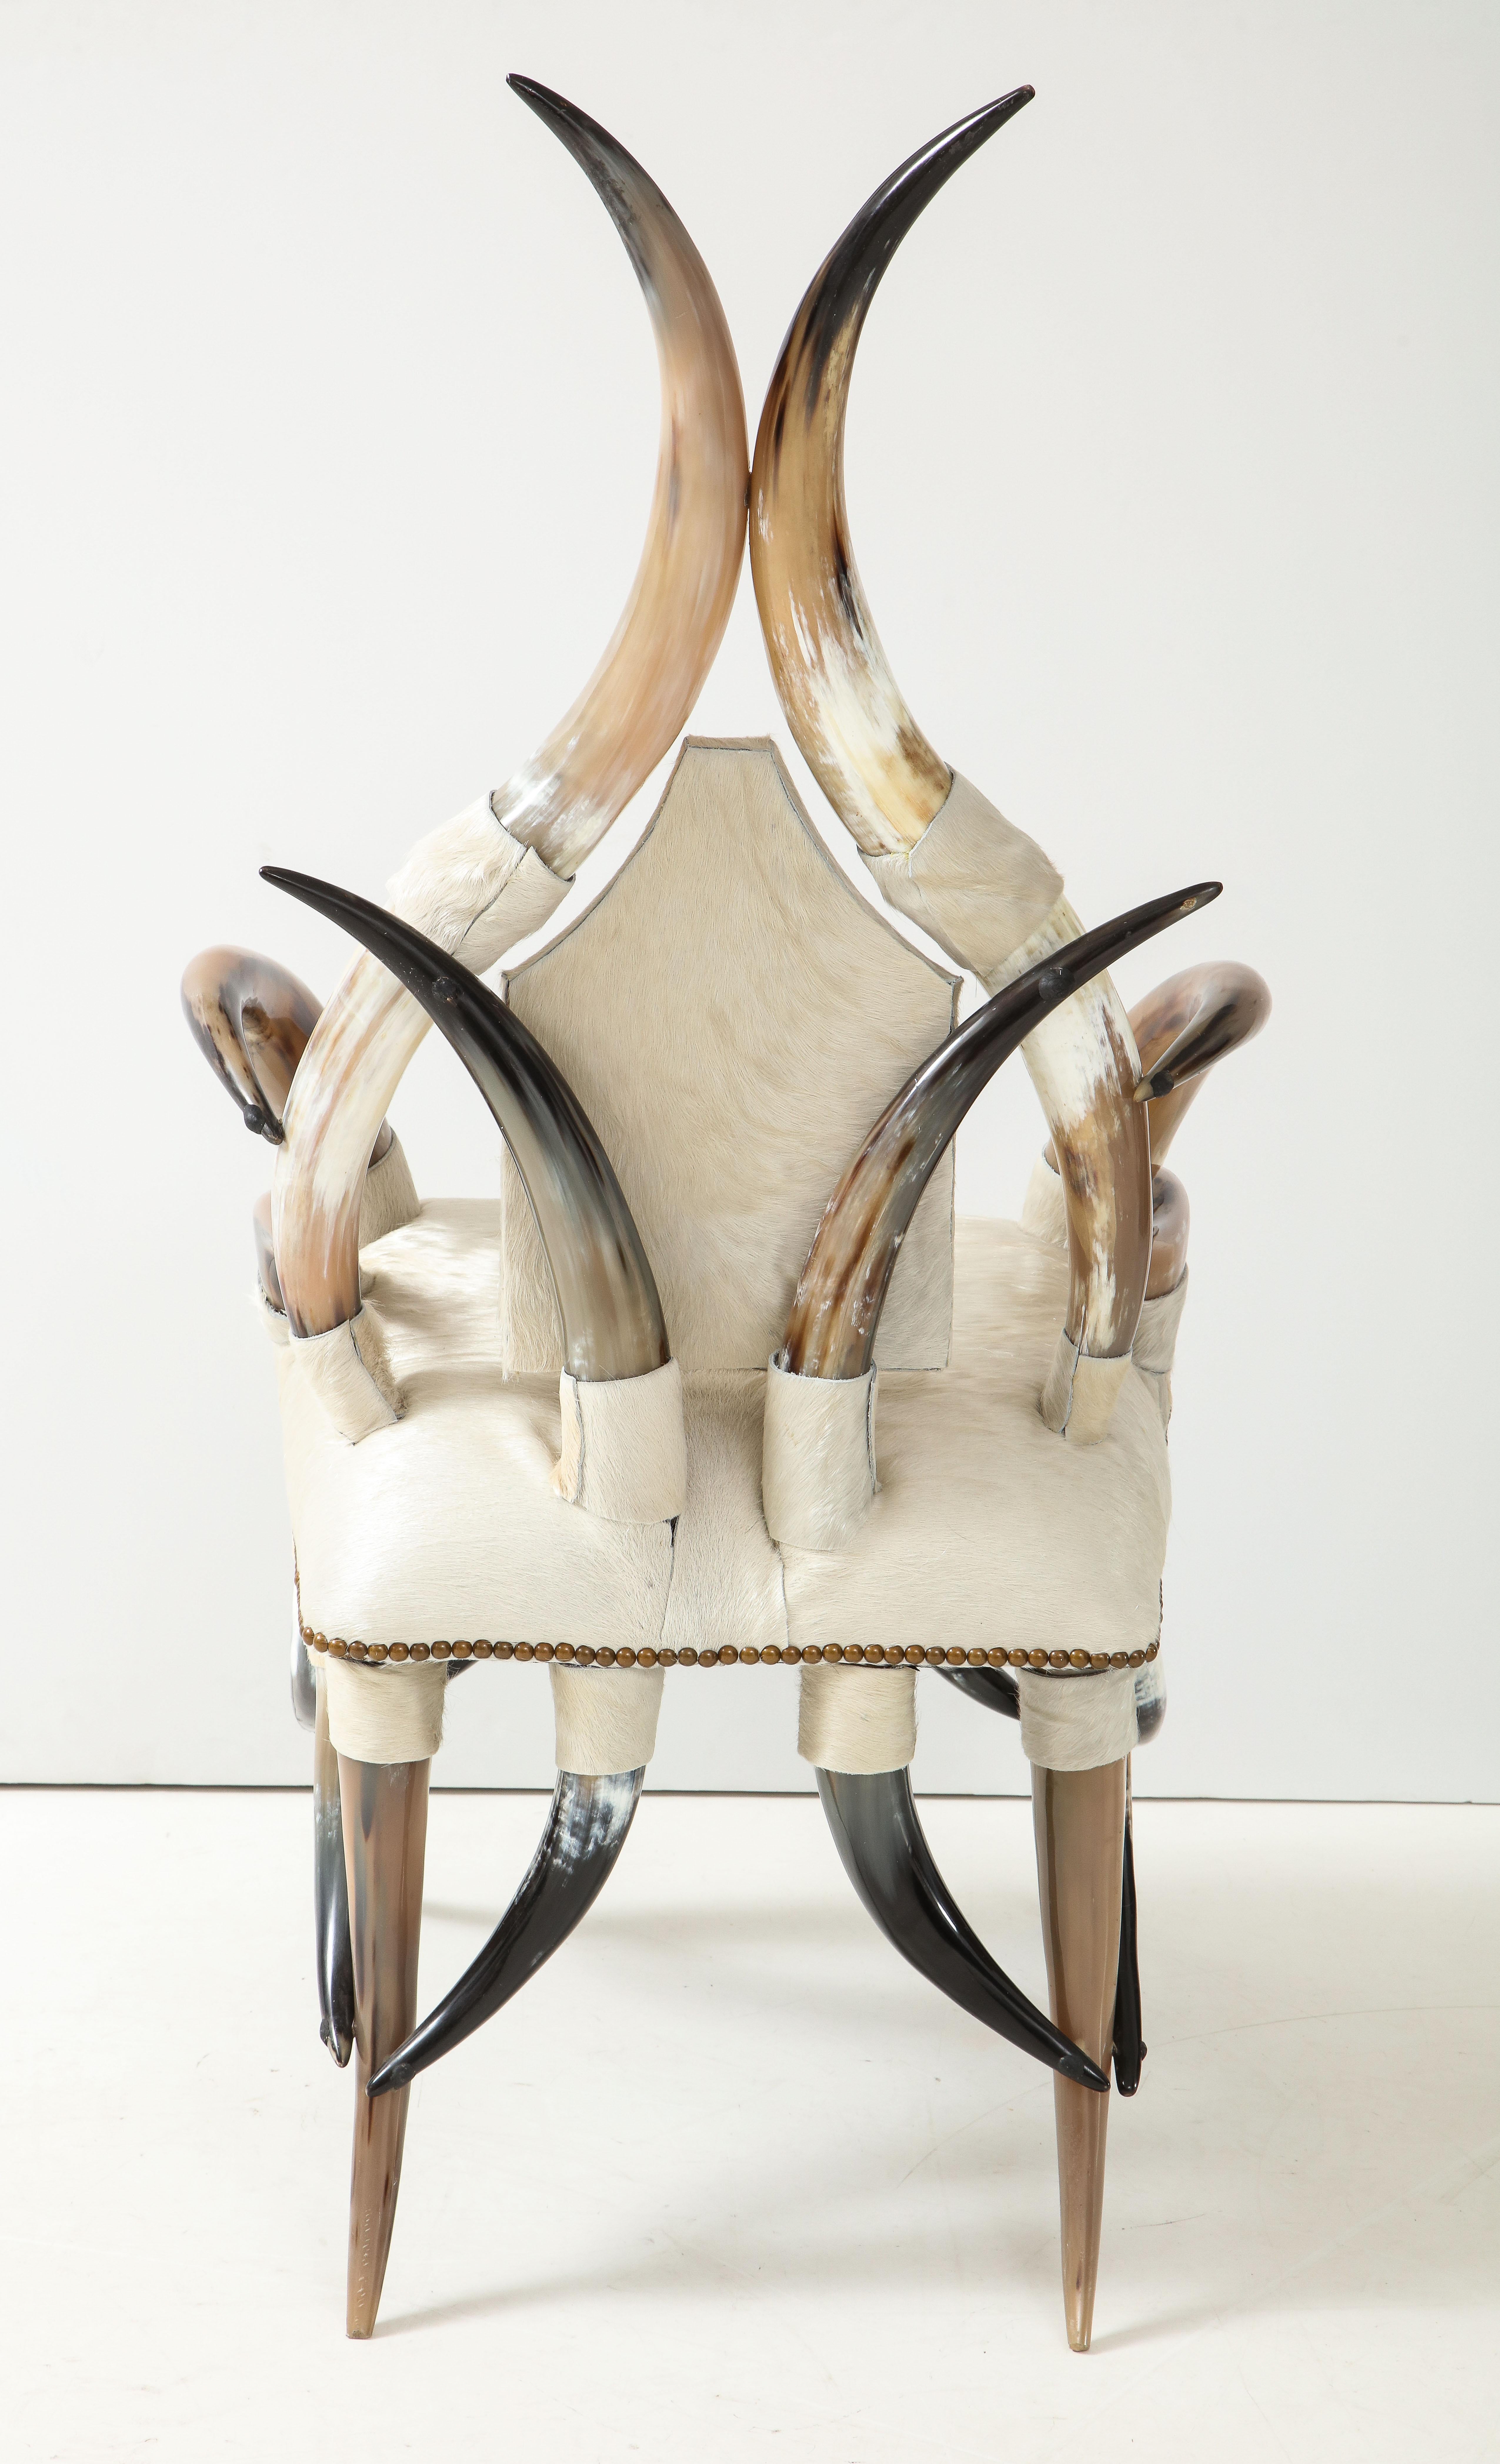 Hand-Crafted American Steer Horn, White Hide Chair